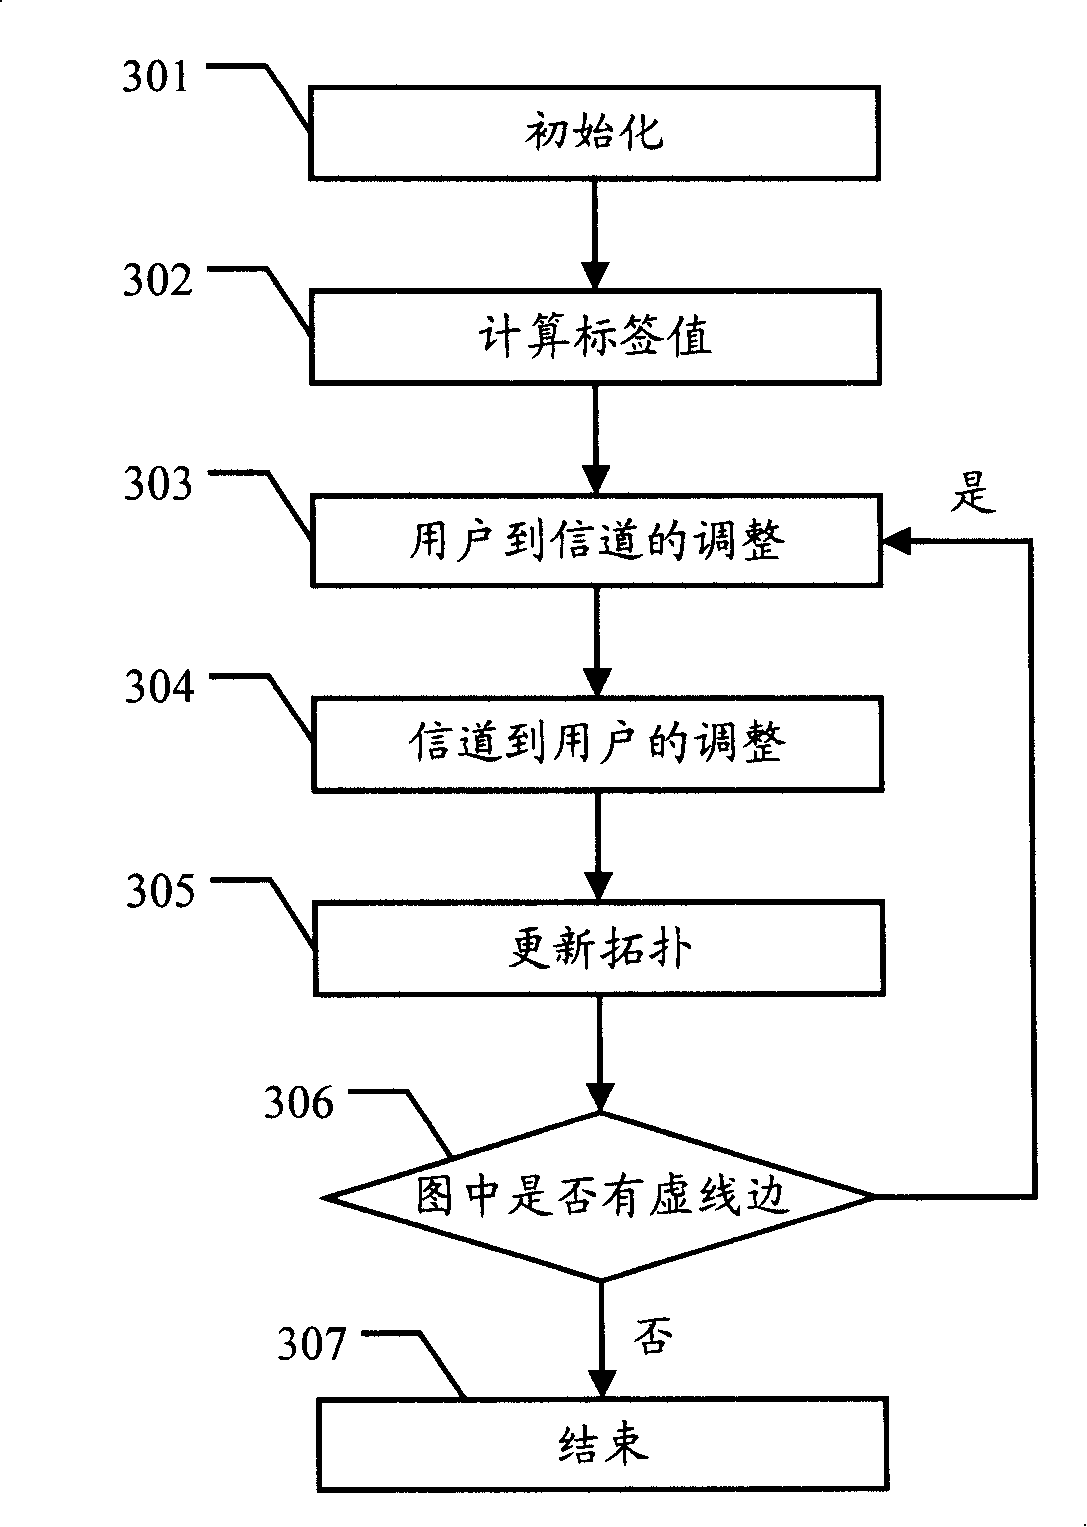 Apparatus and method for allocating channel